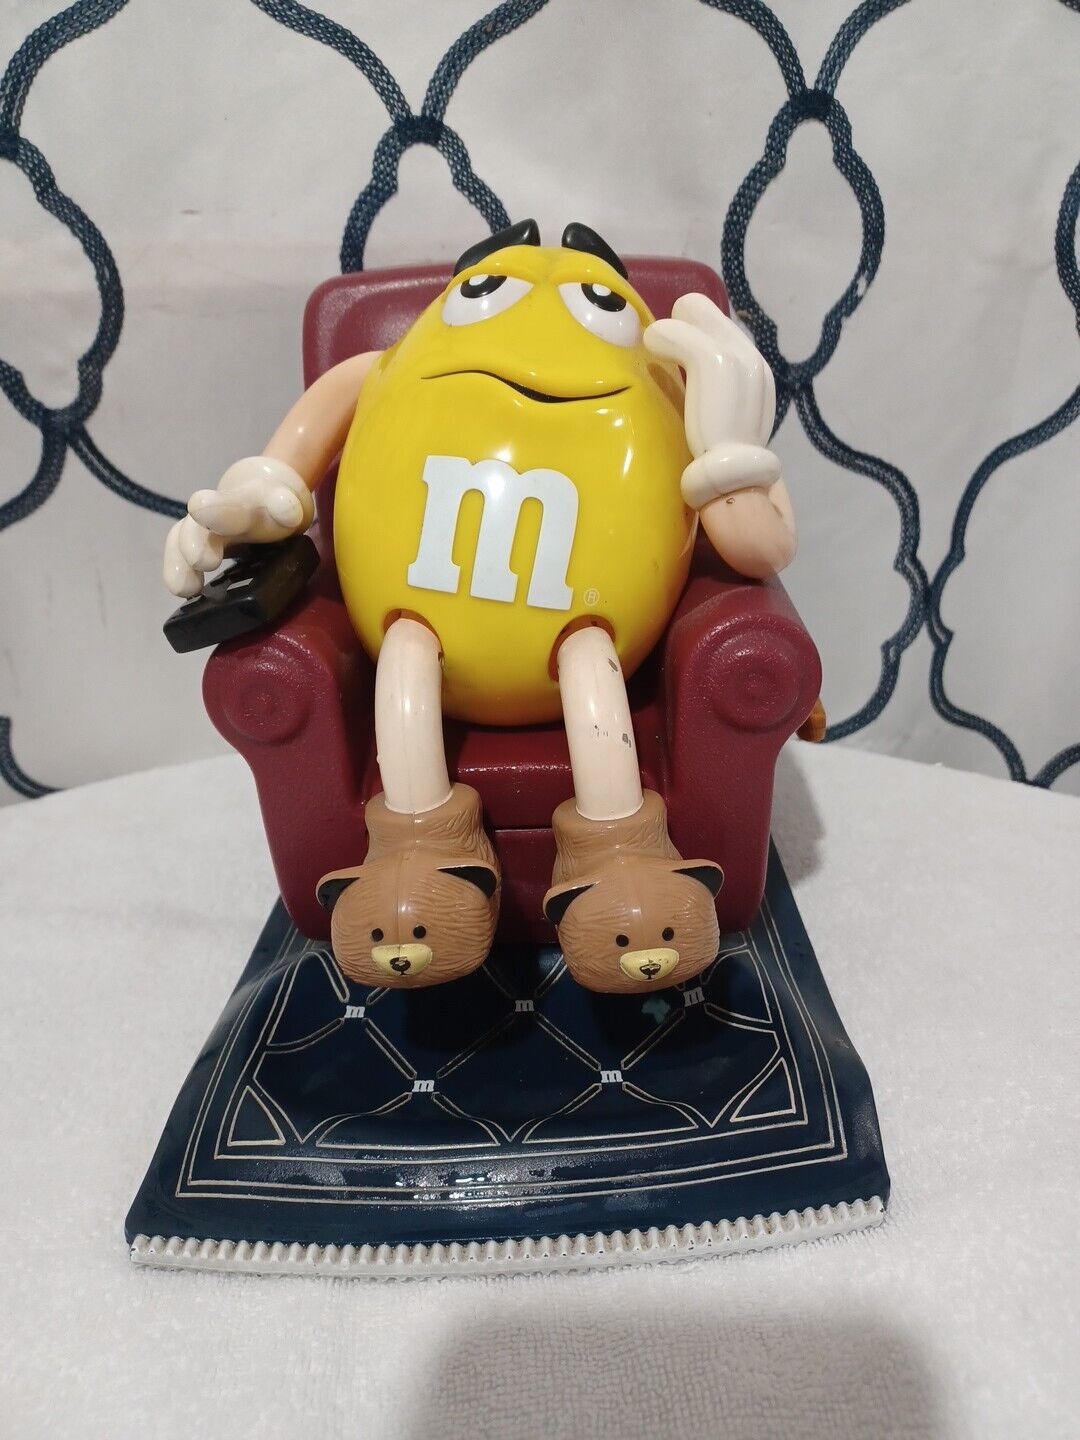 Vintage M&Ms Yellow Figure Chair Recliner Candy Dispenser 1999 Works Mars Inc.